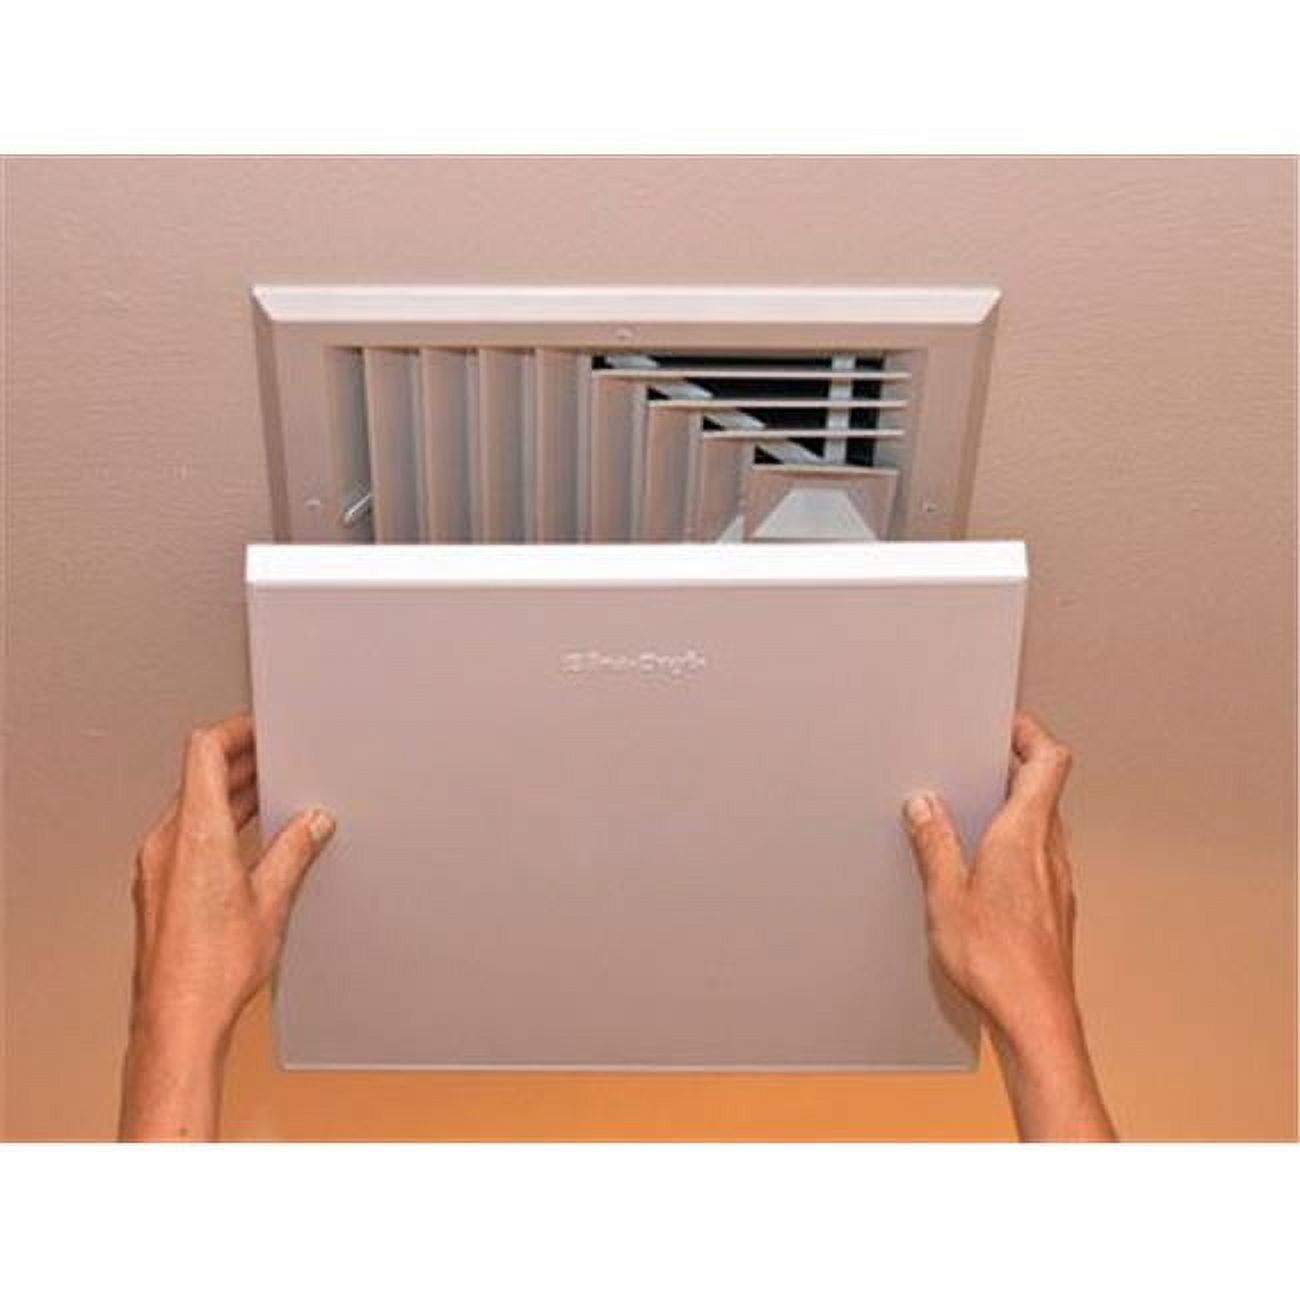 2pcs Magnet Air Registers Vent Cover with Soft Rubber Material Not Leakage for Home Ceiling Wall Floor, Size: 14